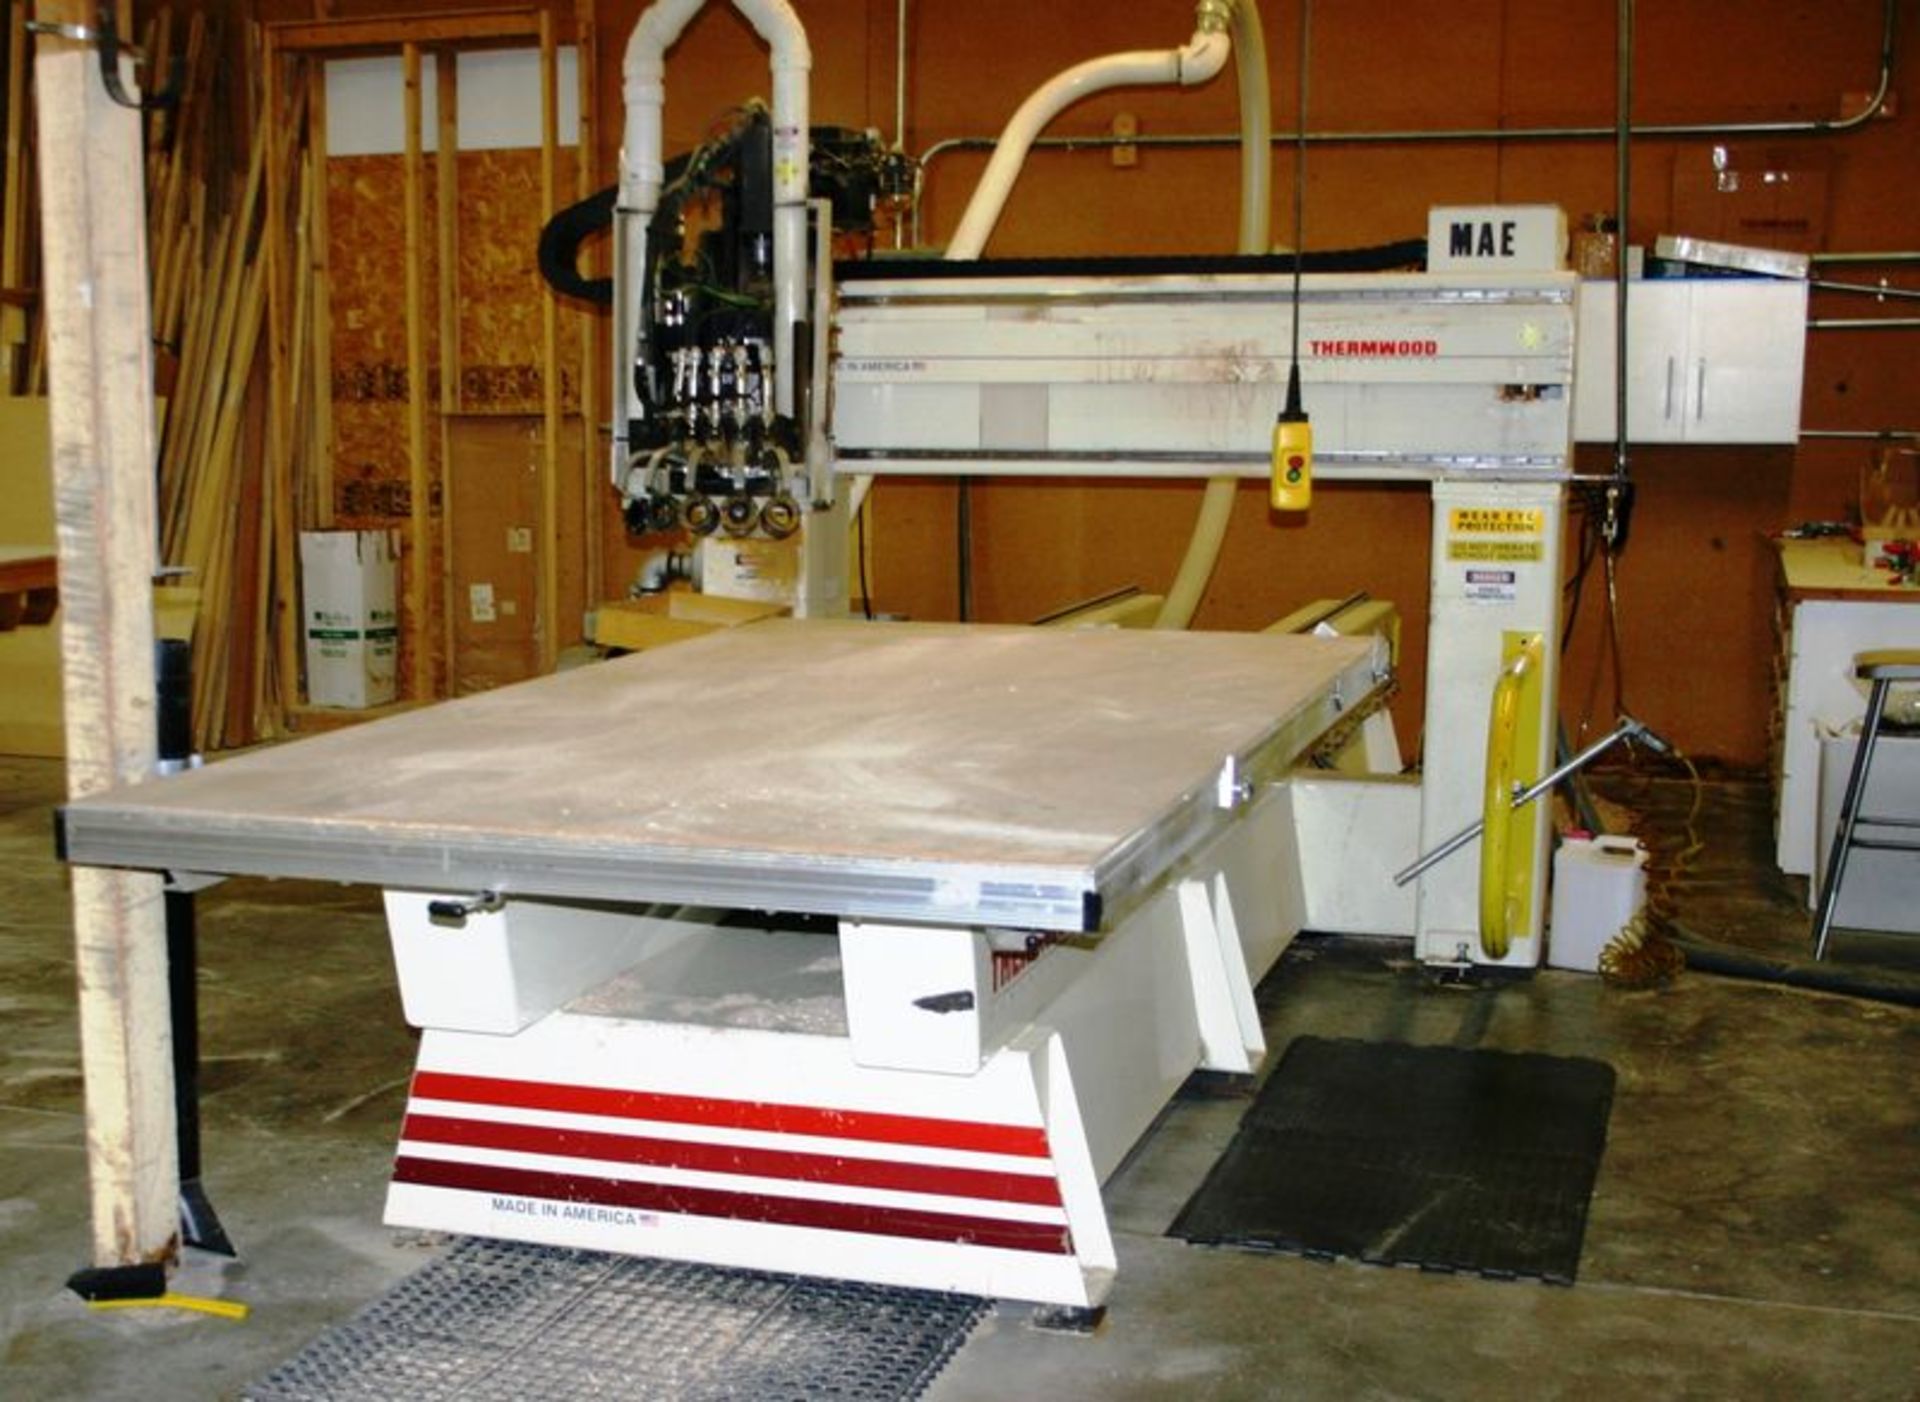 5'x10' Thermwood C-40 4-Axis CNC Router, S/N C402780700, New 2000 Specifications, Moving table